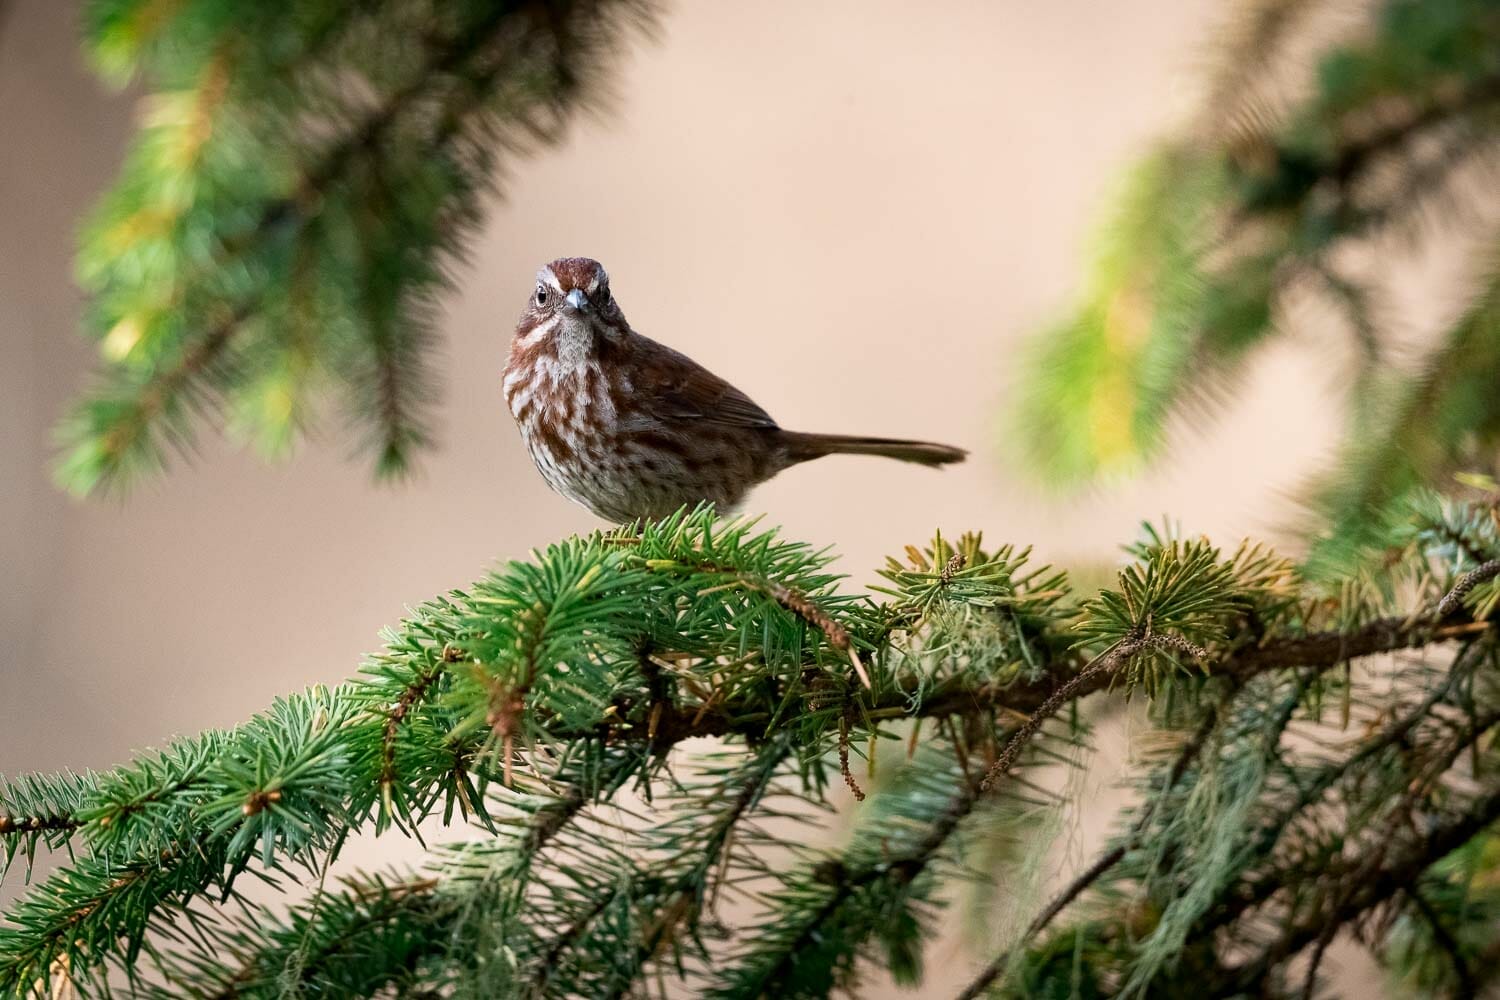 A song sparrow perched on the branch of a coniferous tree.